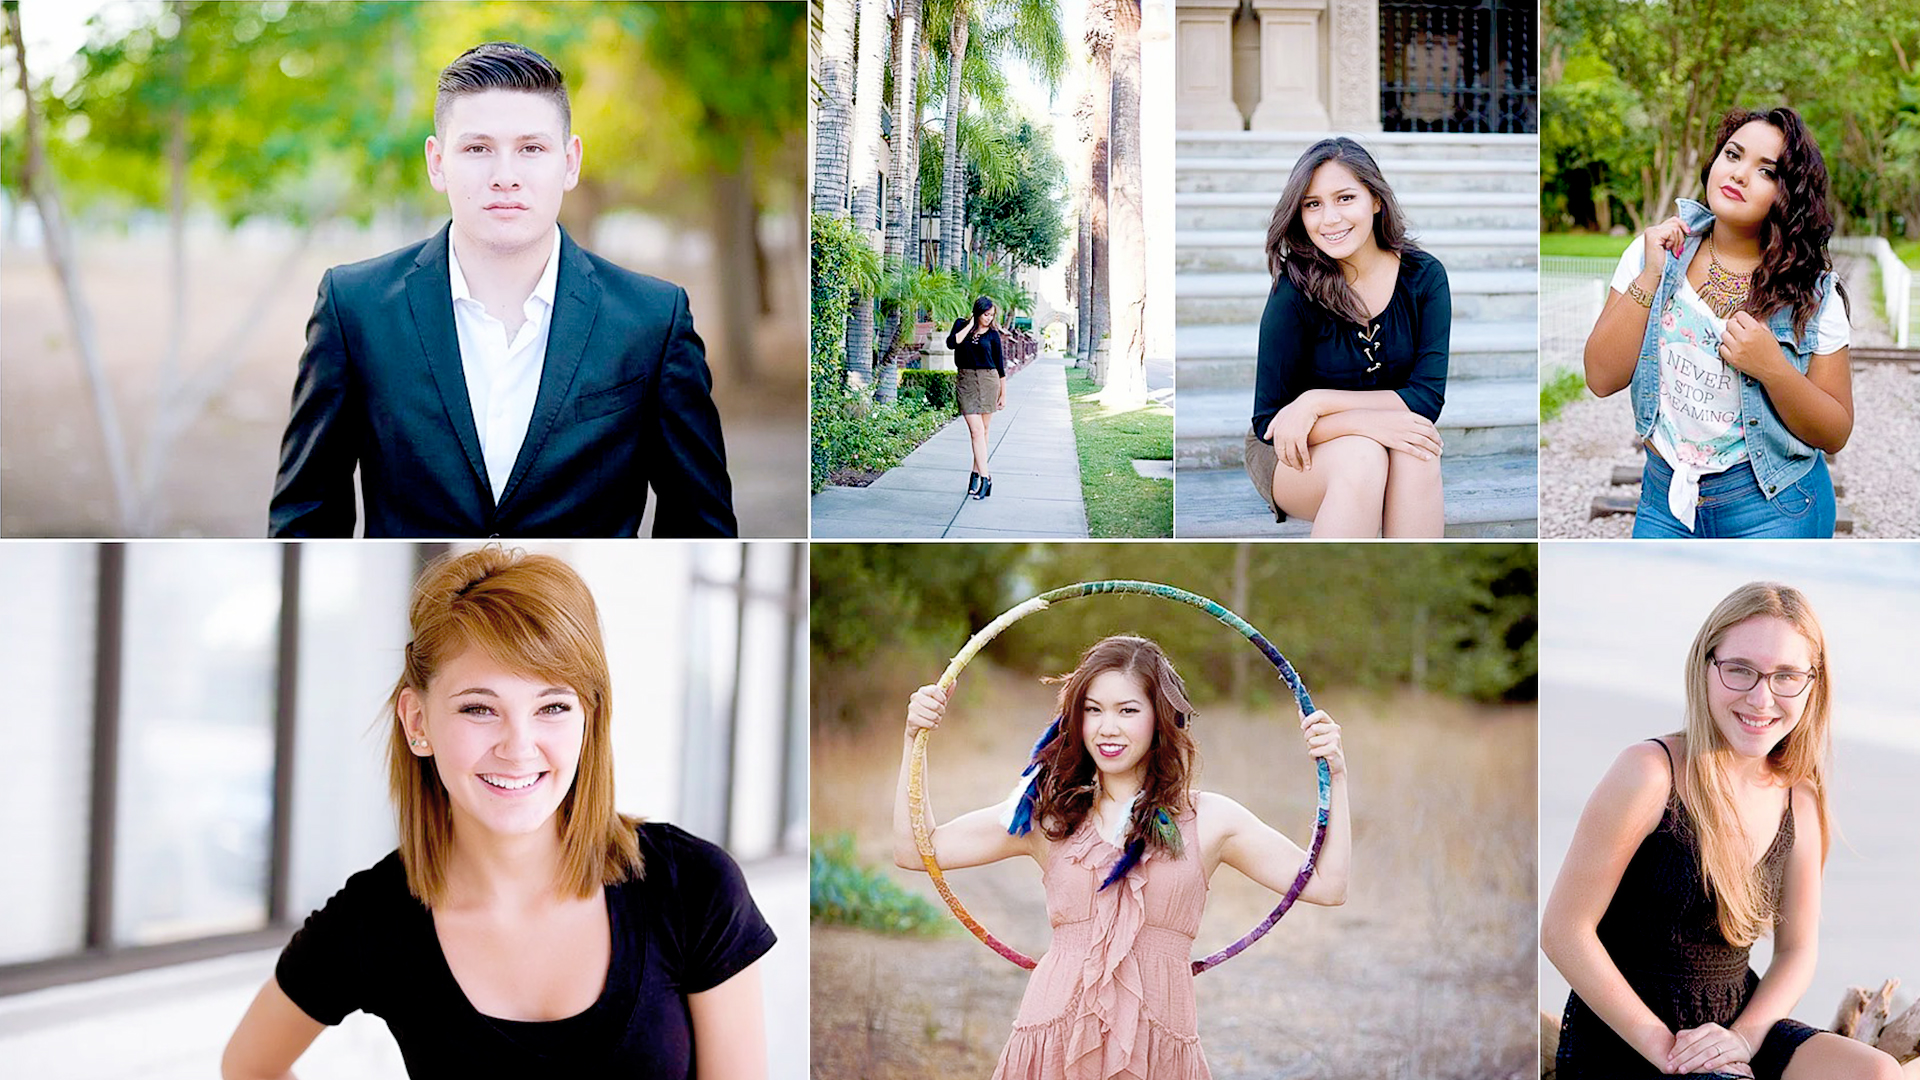 7 Tips For Perfect Teen Photography: How To Get Real Expressions With Fun Experience